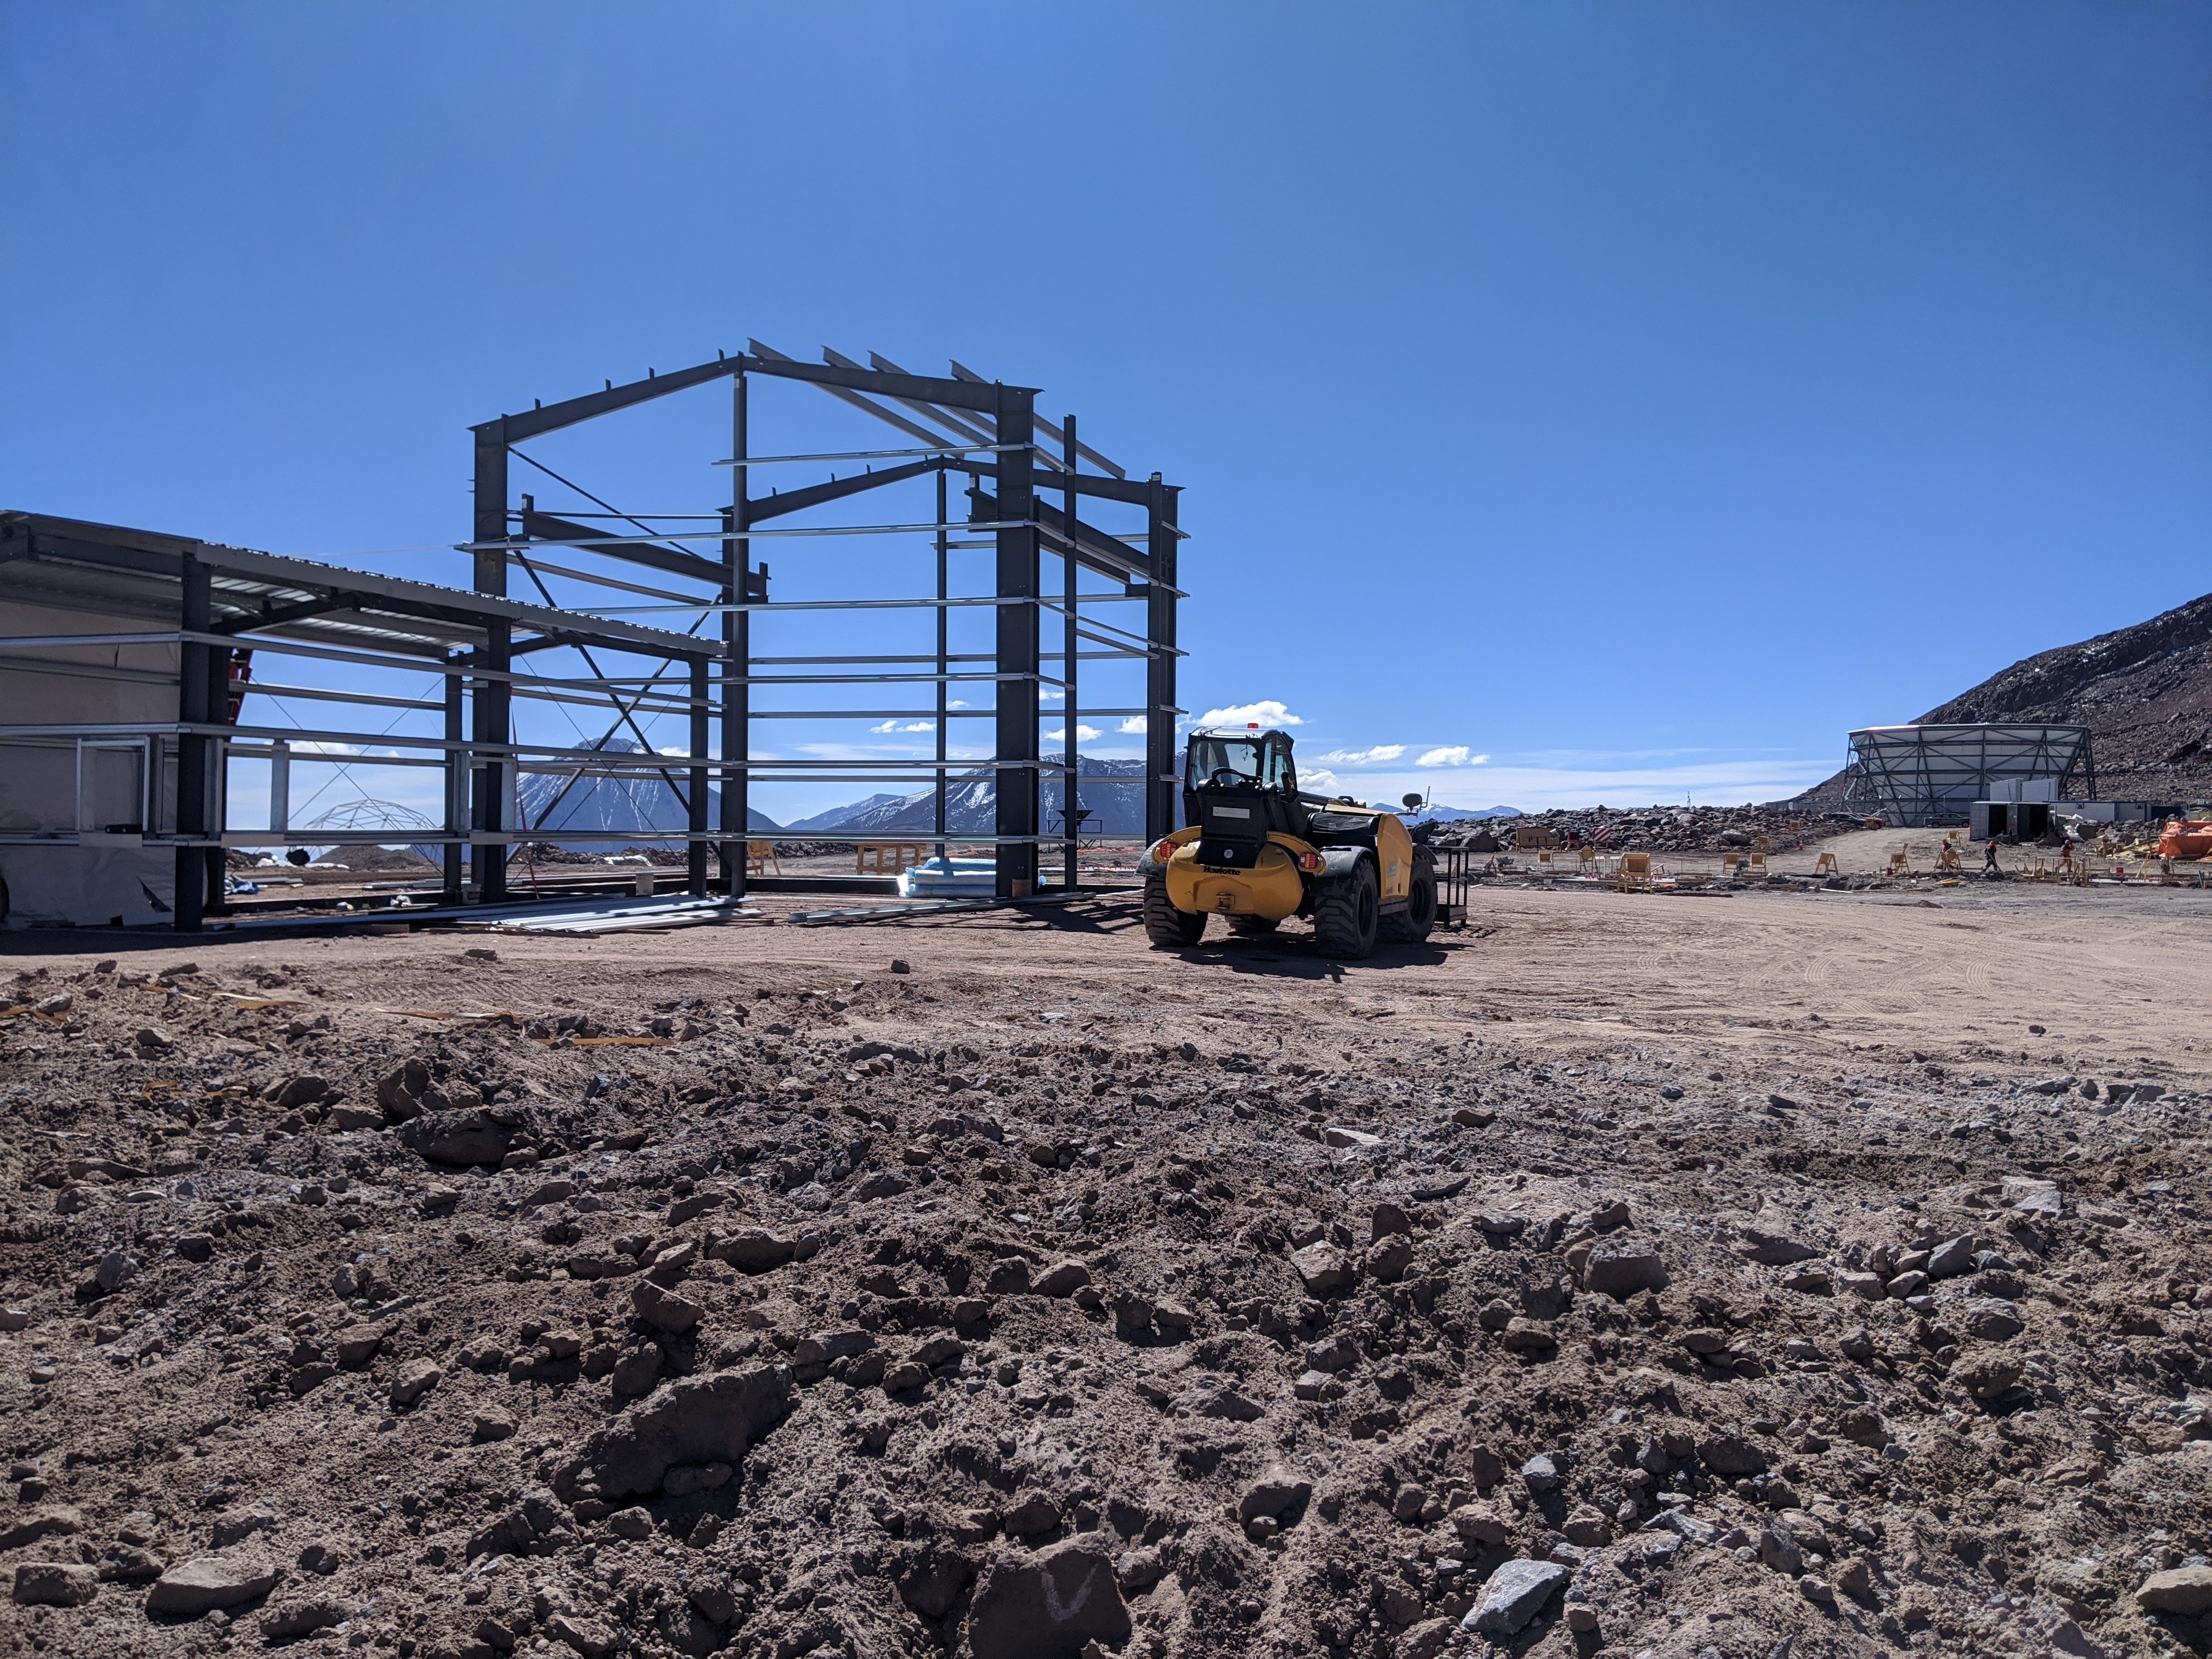 Beams of a building under construction stand in a desert under a blue sky.